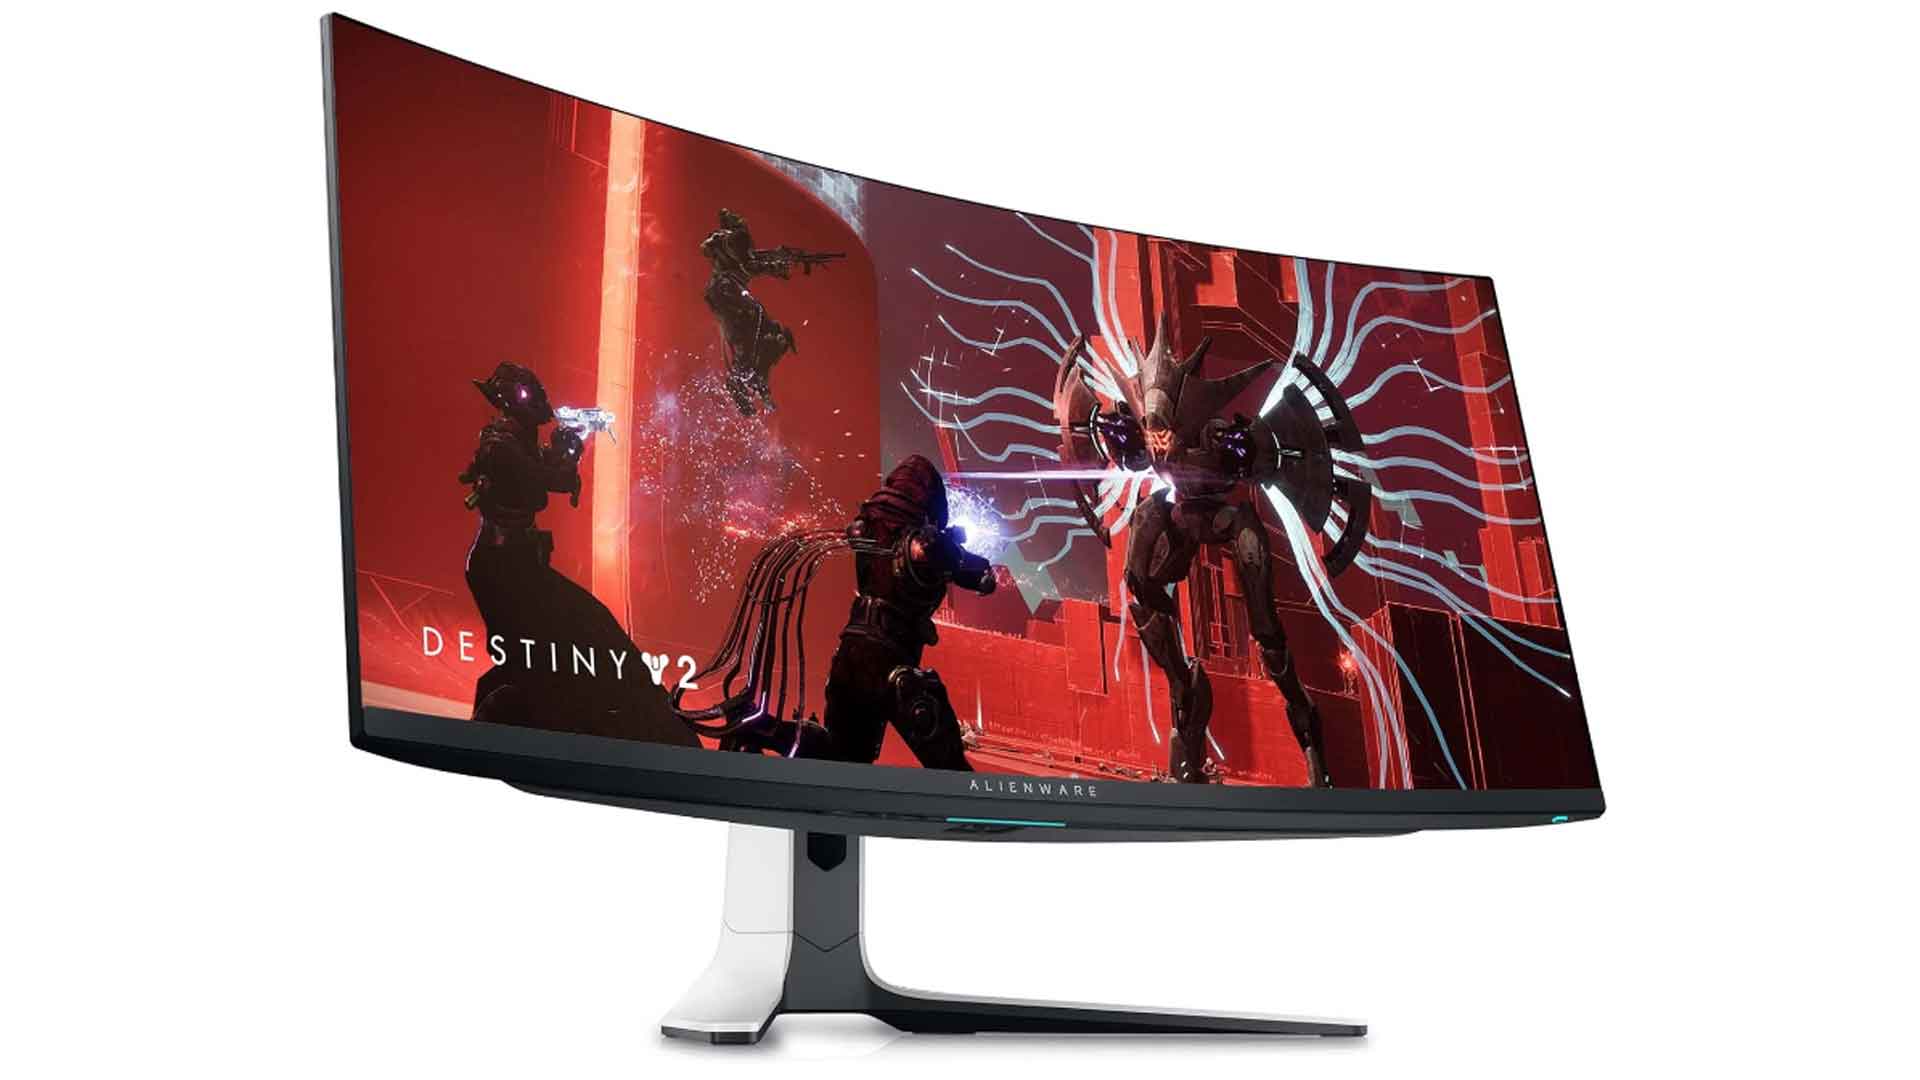 Alienware AW3423DW, Alienware AW3423DW gaming monitor, curved gaming monitor, Alienware gaming monitor, 34-inch gaming monitor, 175hz gaming monitor, Alienware AW3423DW price, buy Alienware AW3423DW, PC gaming, gaming gear